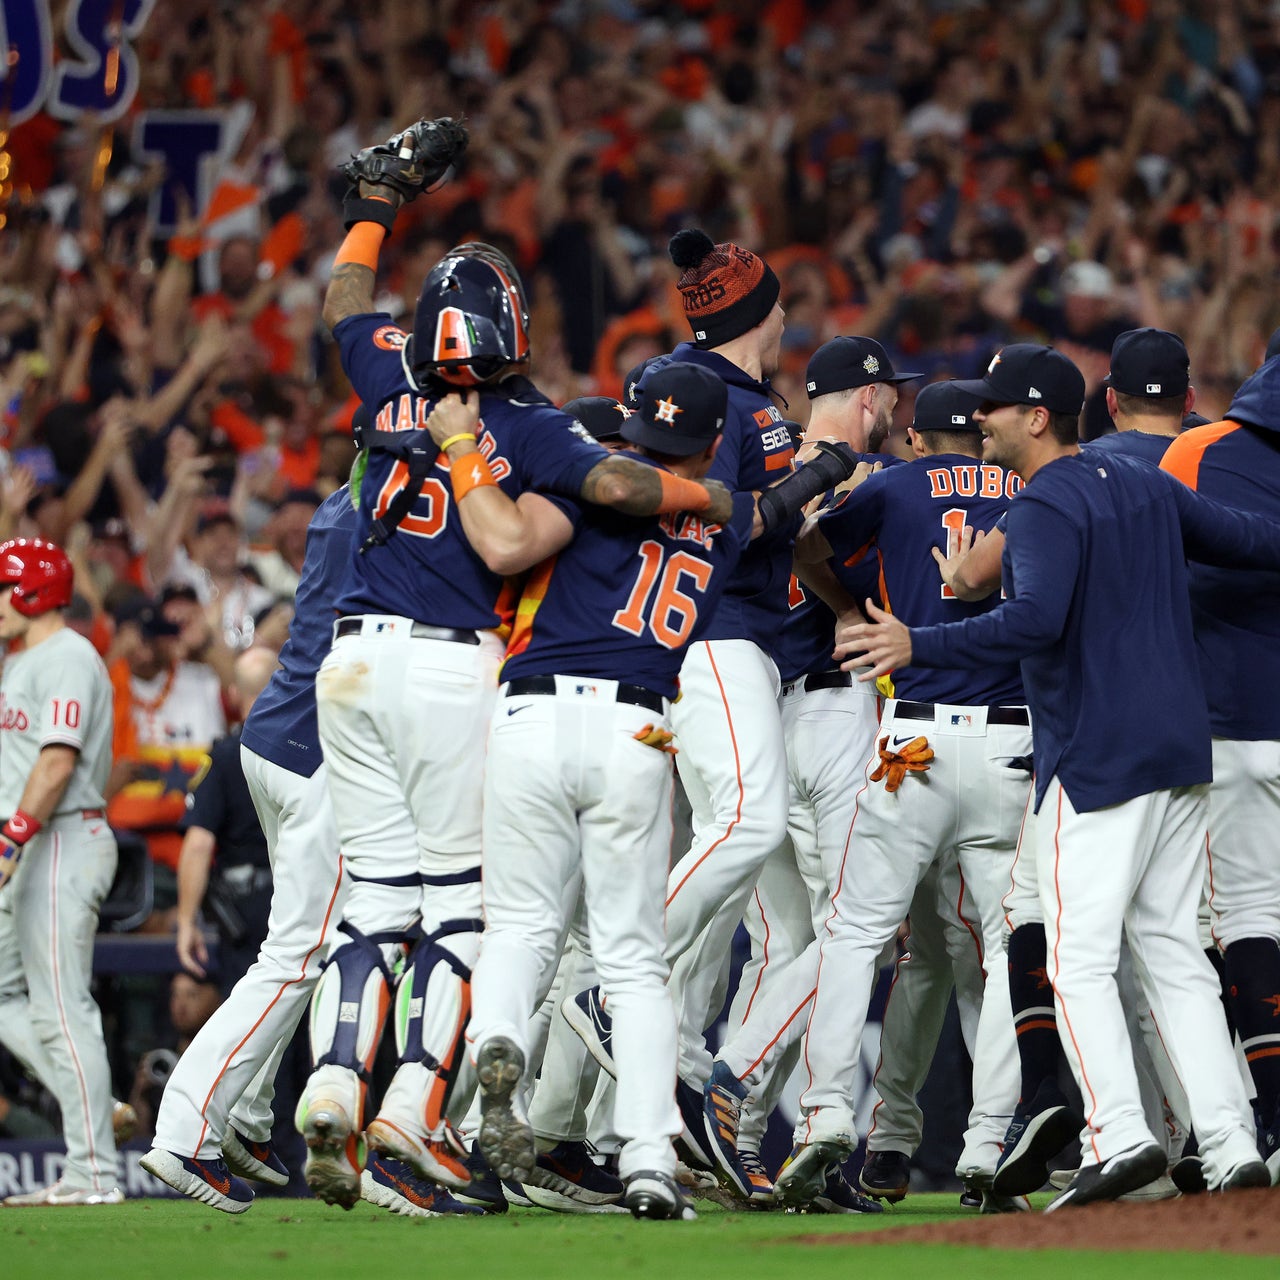 Astros win 2022 World Series, solidifying their status as a